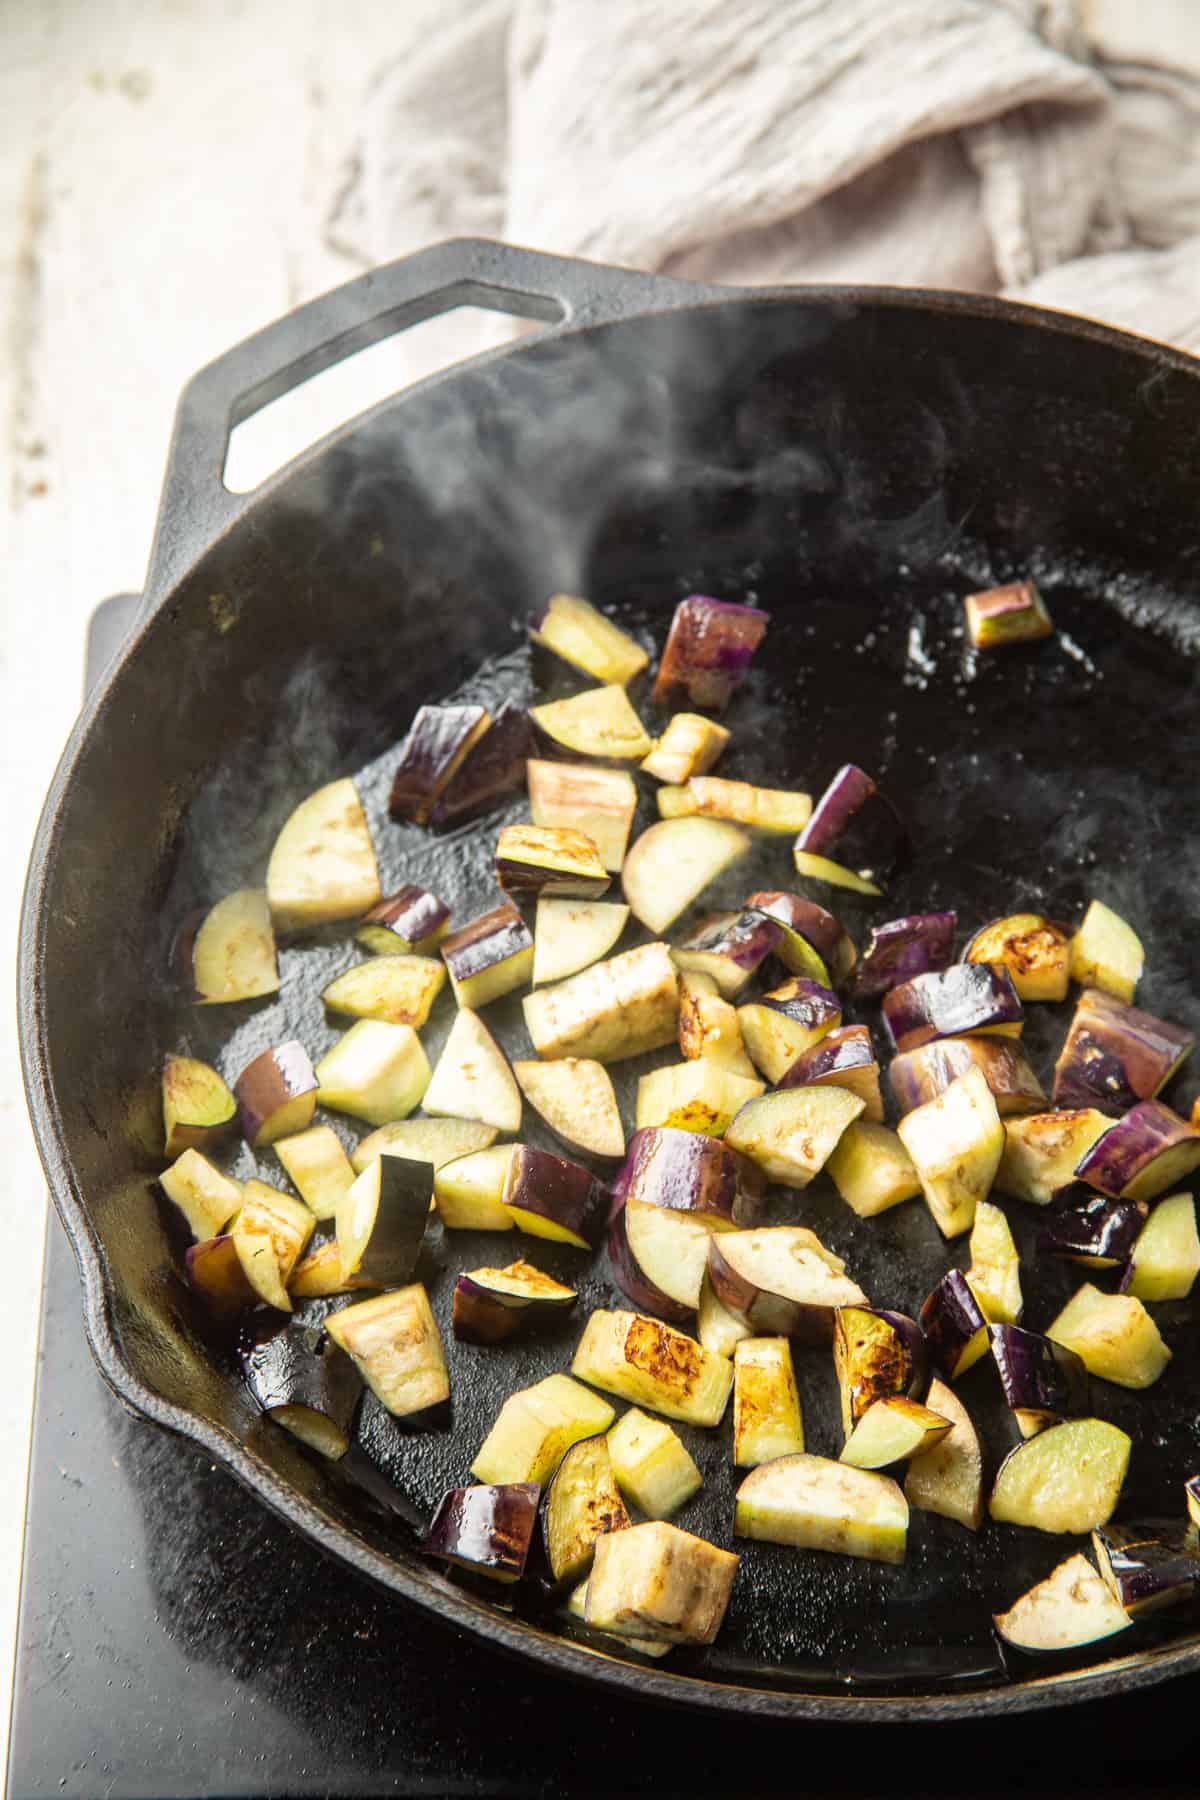 Diced eggplant cooking in a skillet.